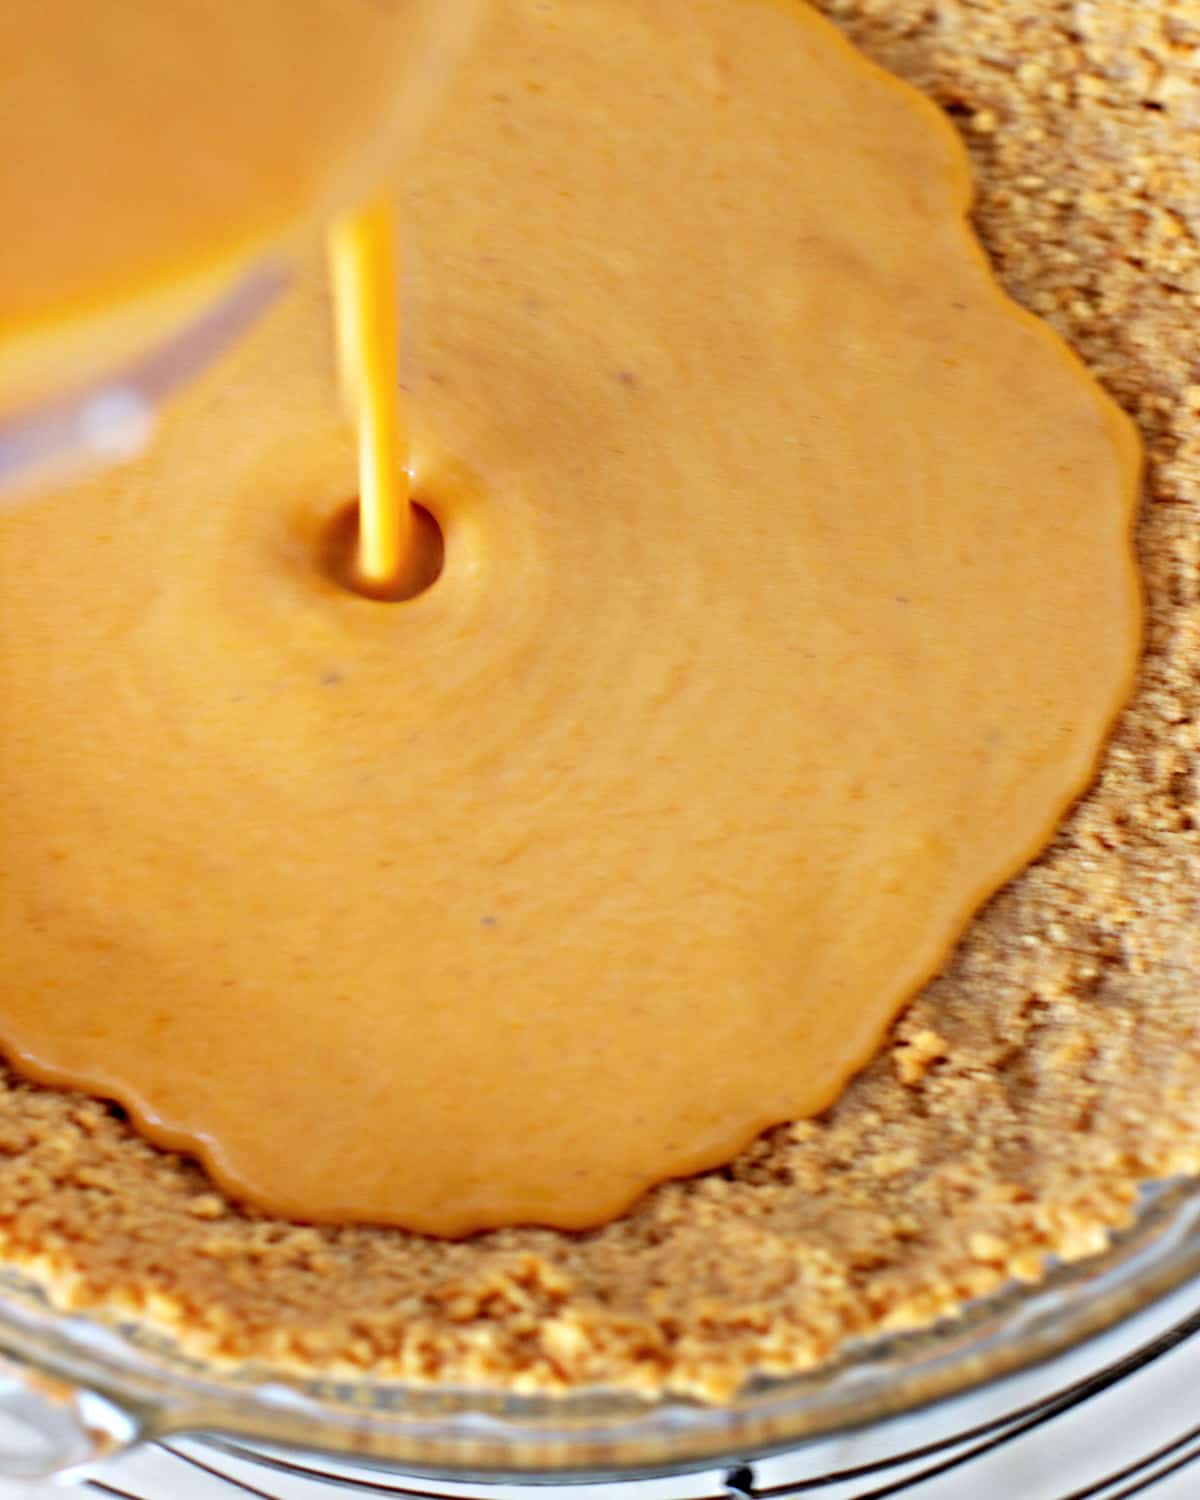 Sweet potato pie filling being poured into a crumb crust.